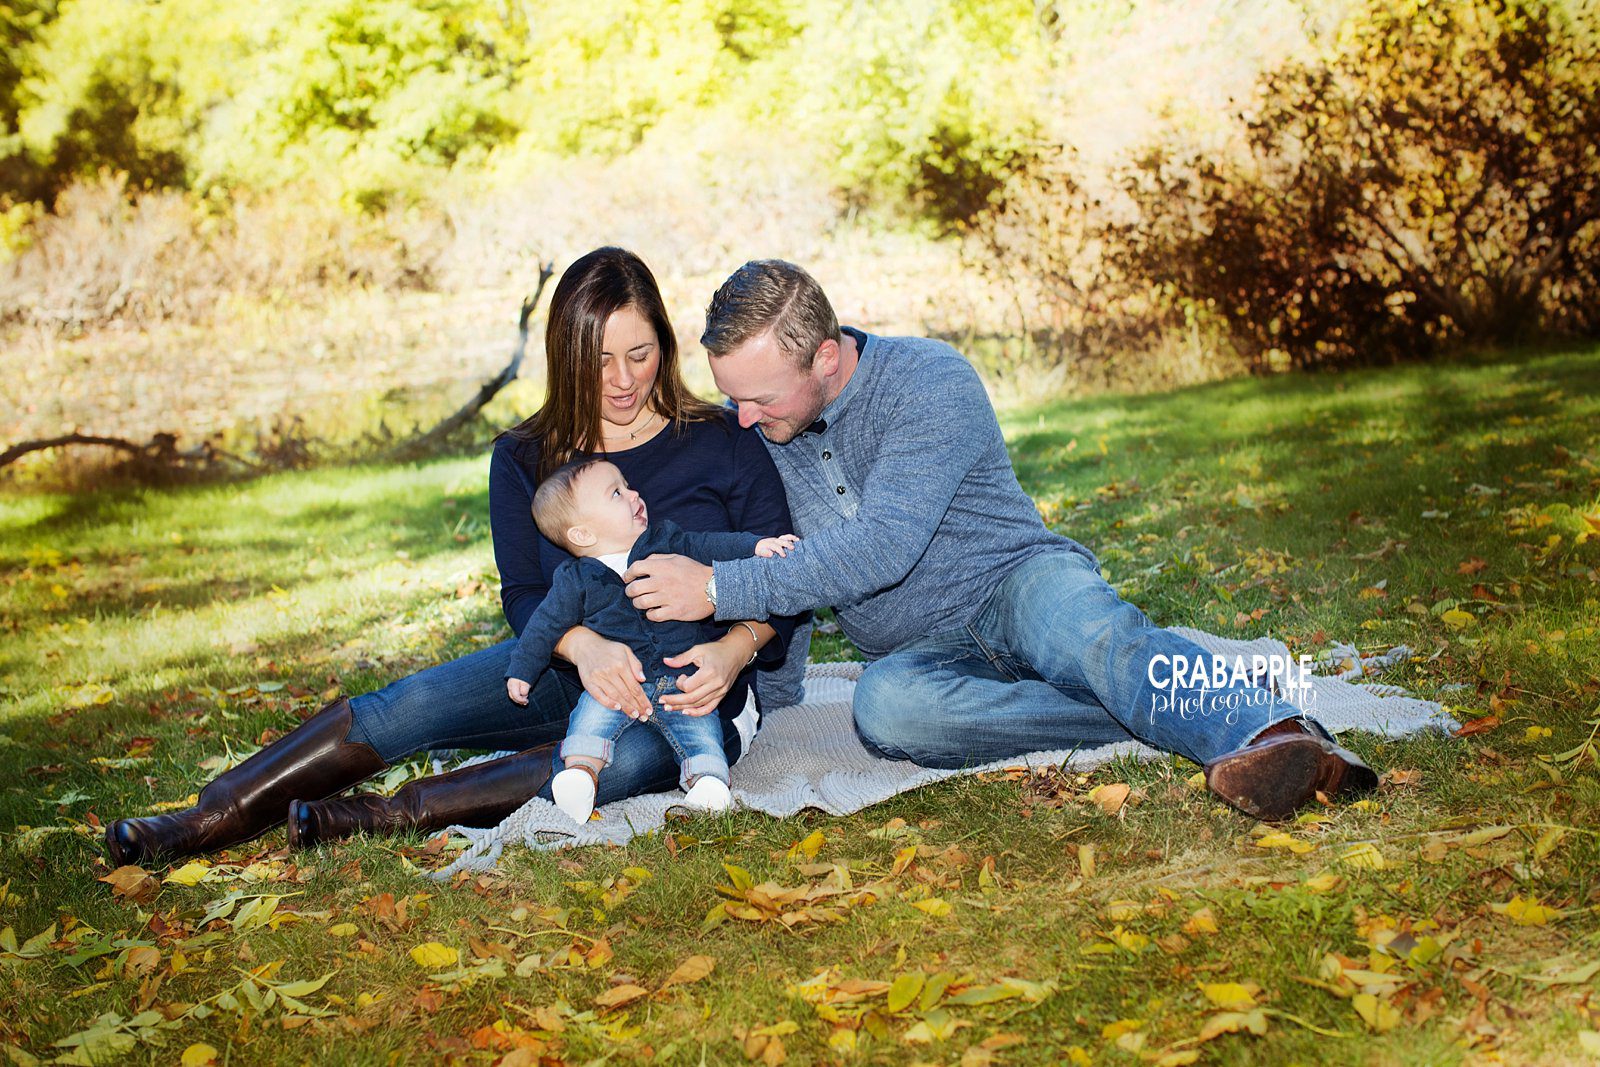 Outdoor Family and Baby Photos at the Park